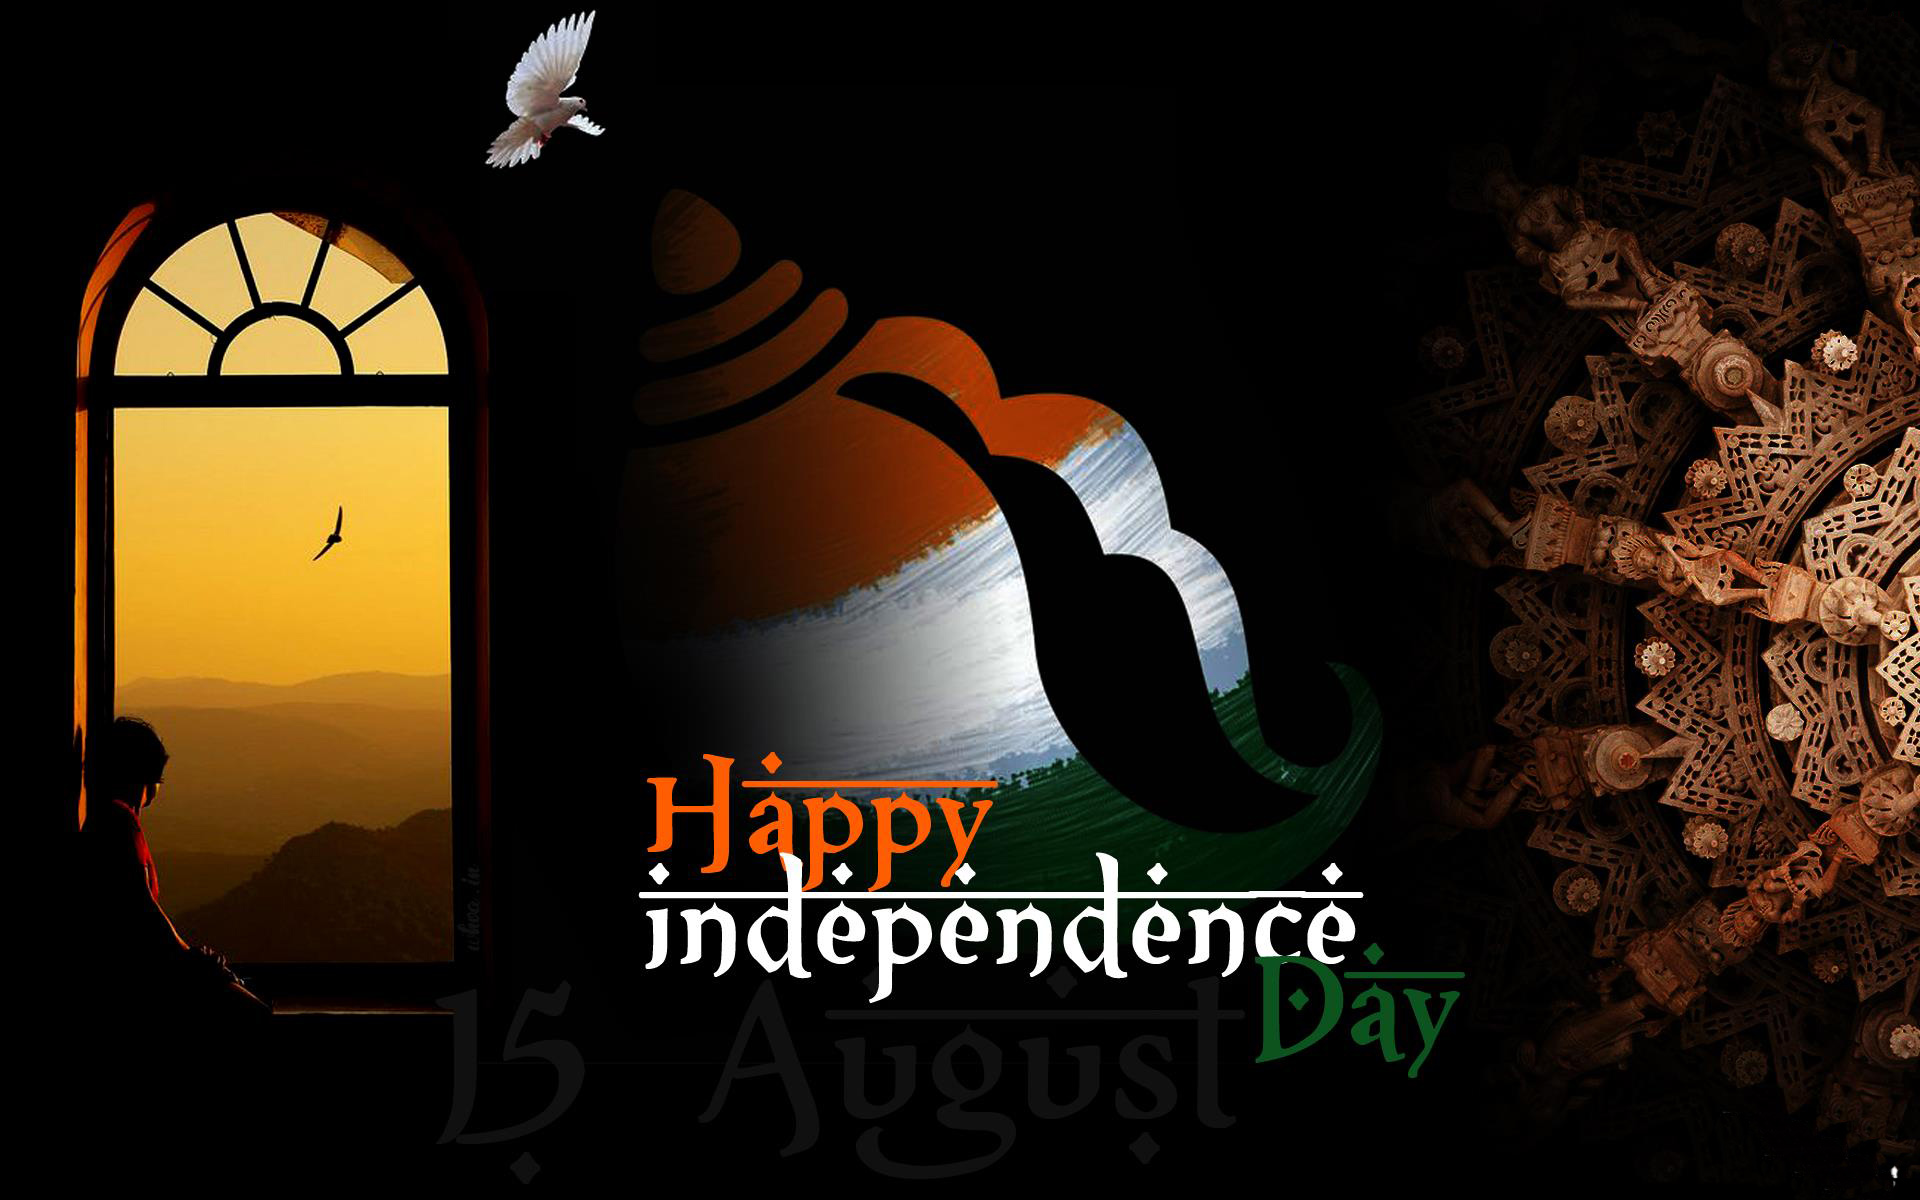 71st!!! Happy Independence Day 2017 Quotes Sms Messages Wallpapers Pics Whatsapp Status Dp Images